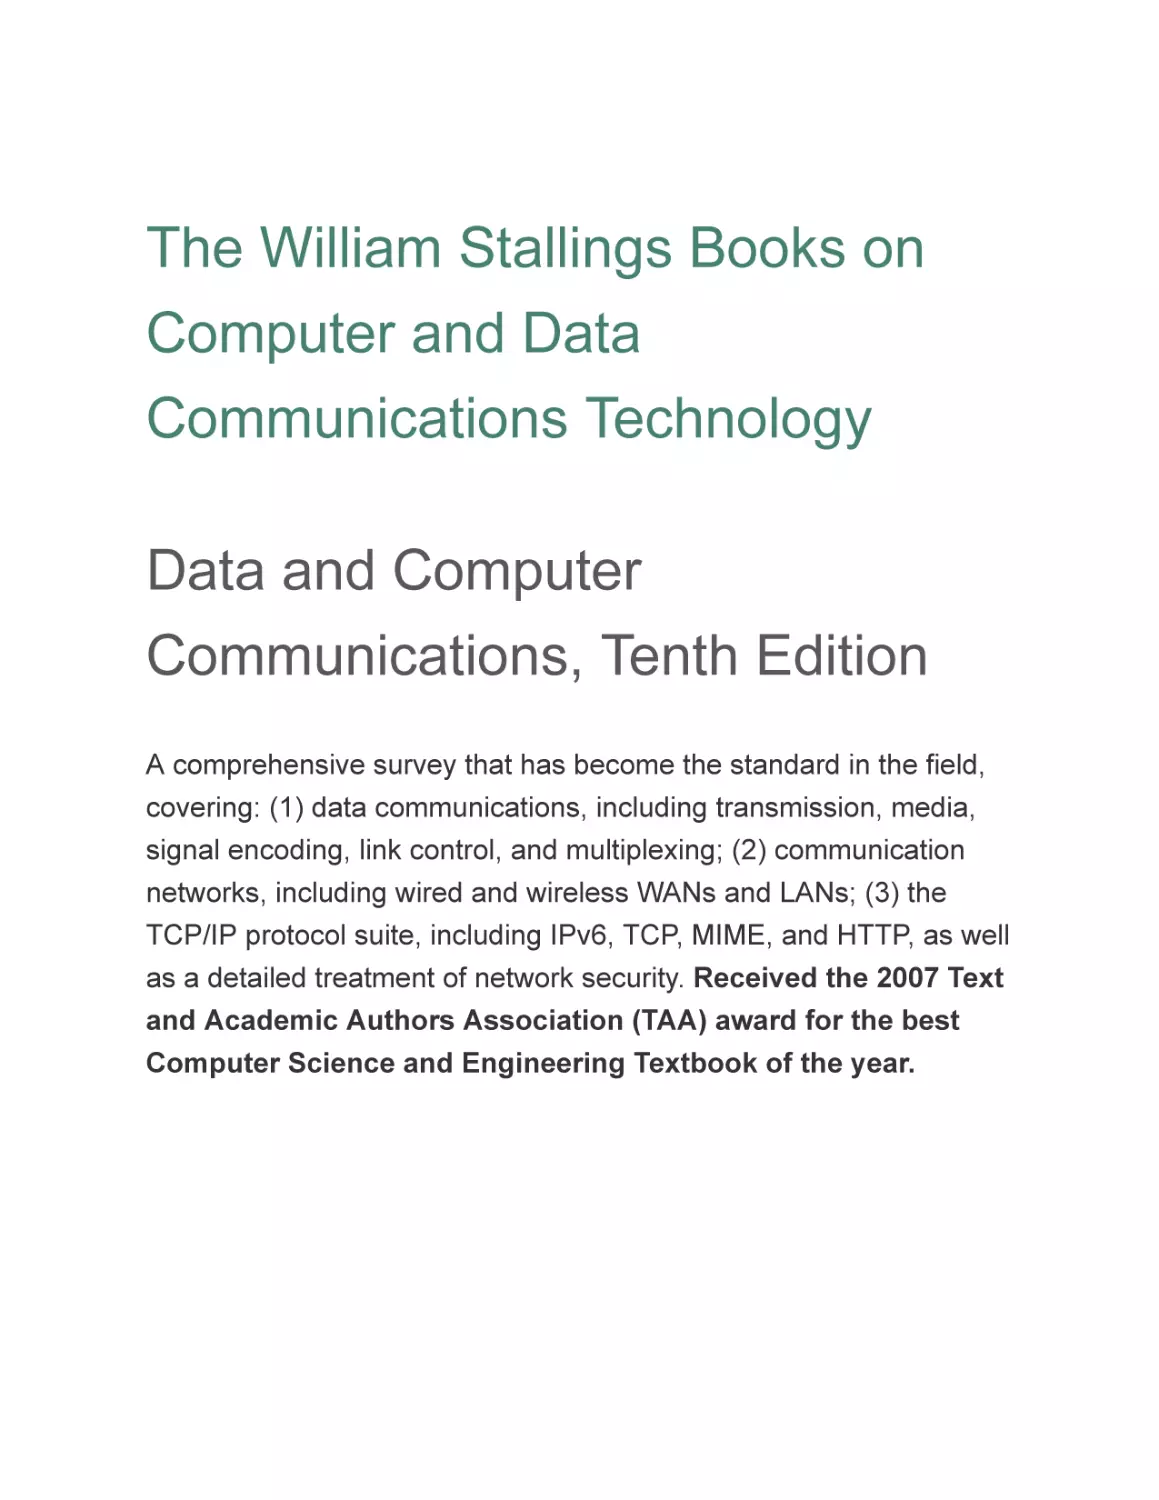 The William Stallings Books on Computer and Data Communications Technology
Data and Computer Communications, Tenth Edition